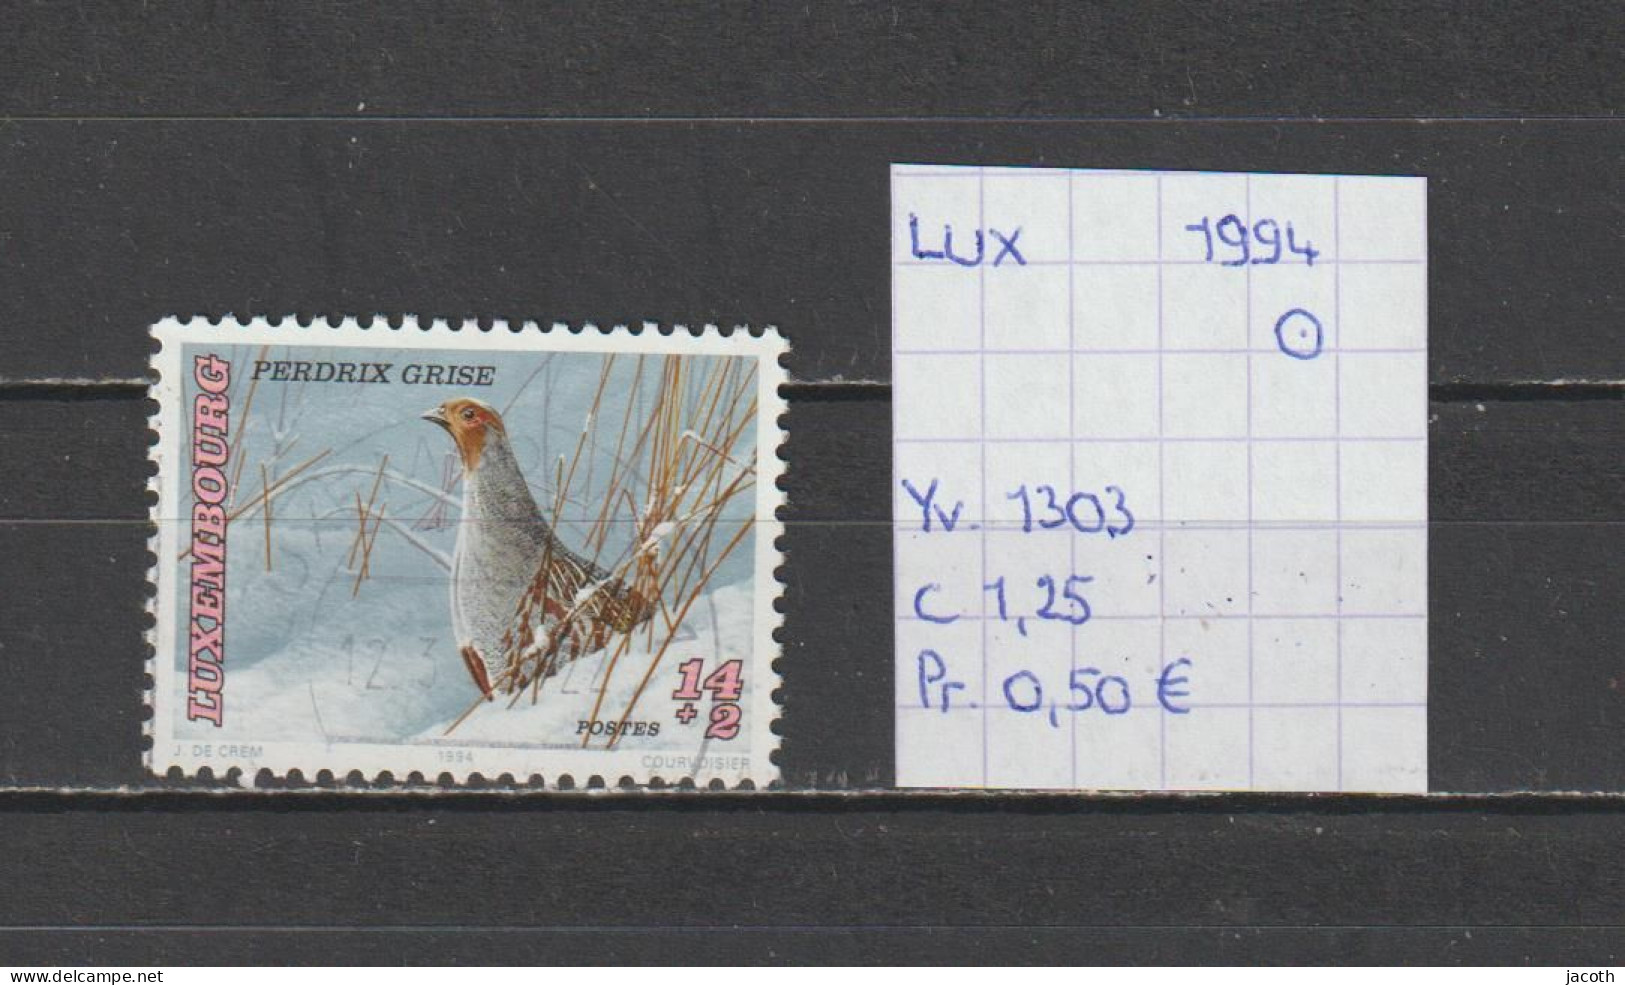 (TJ) Luxembourg 1994 - YT 1303 (gest./obl./used) - Gebraucht